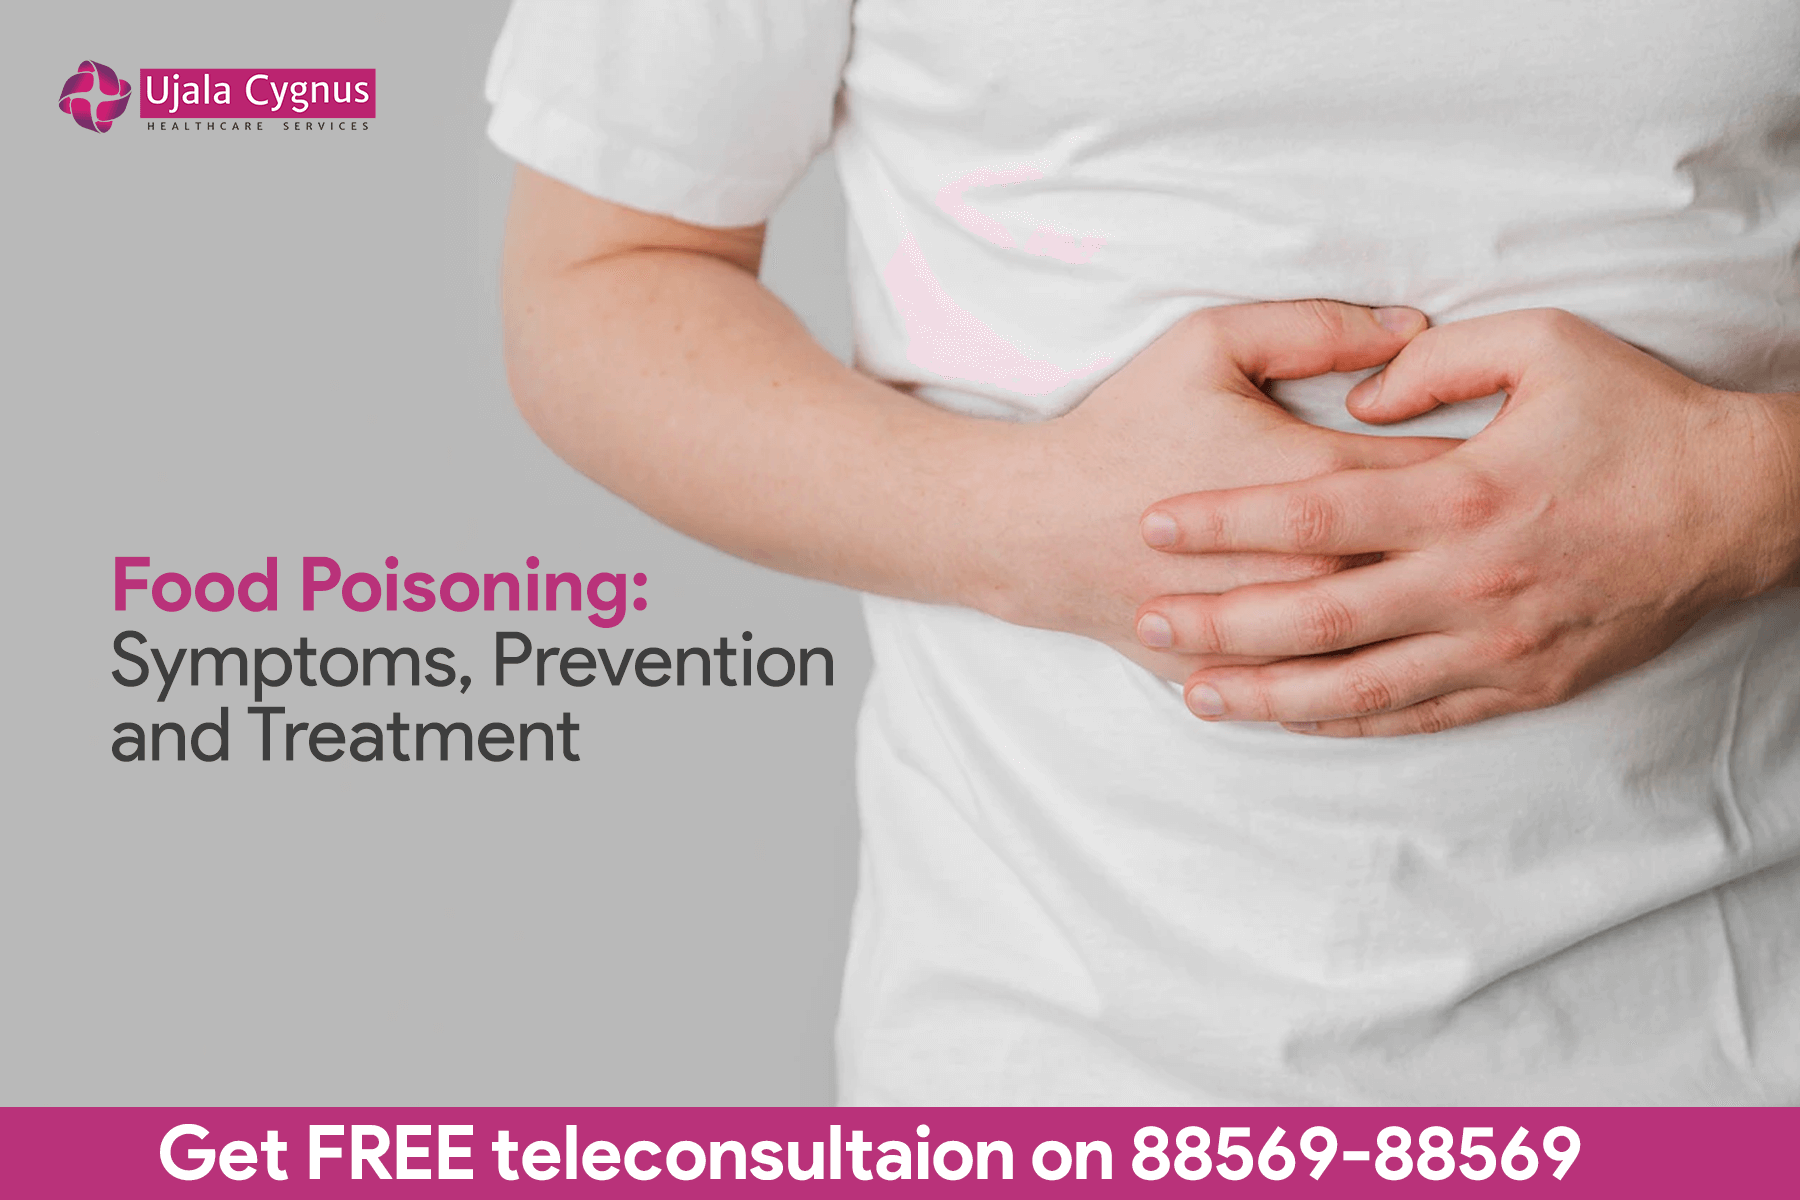 Food Poisoning: Symptoms, Prevention and Treatment